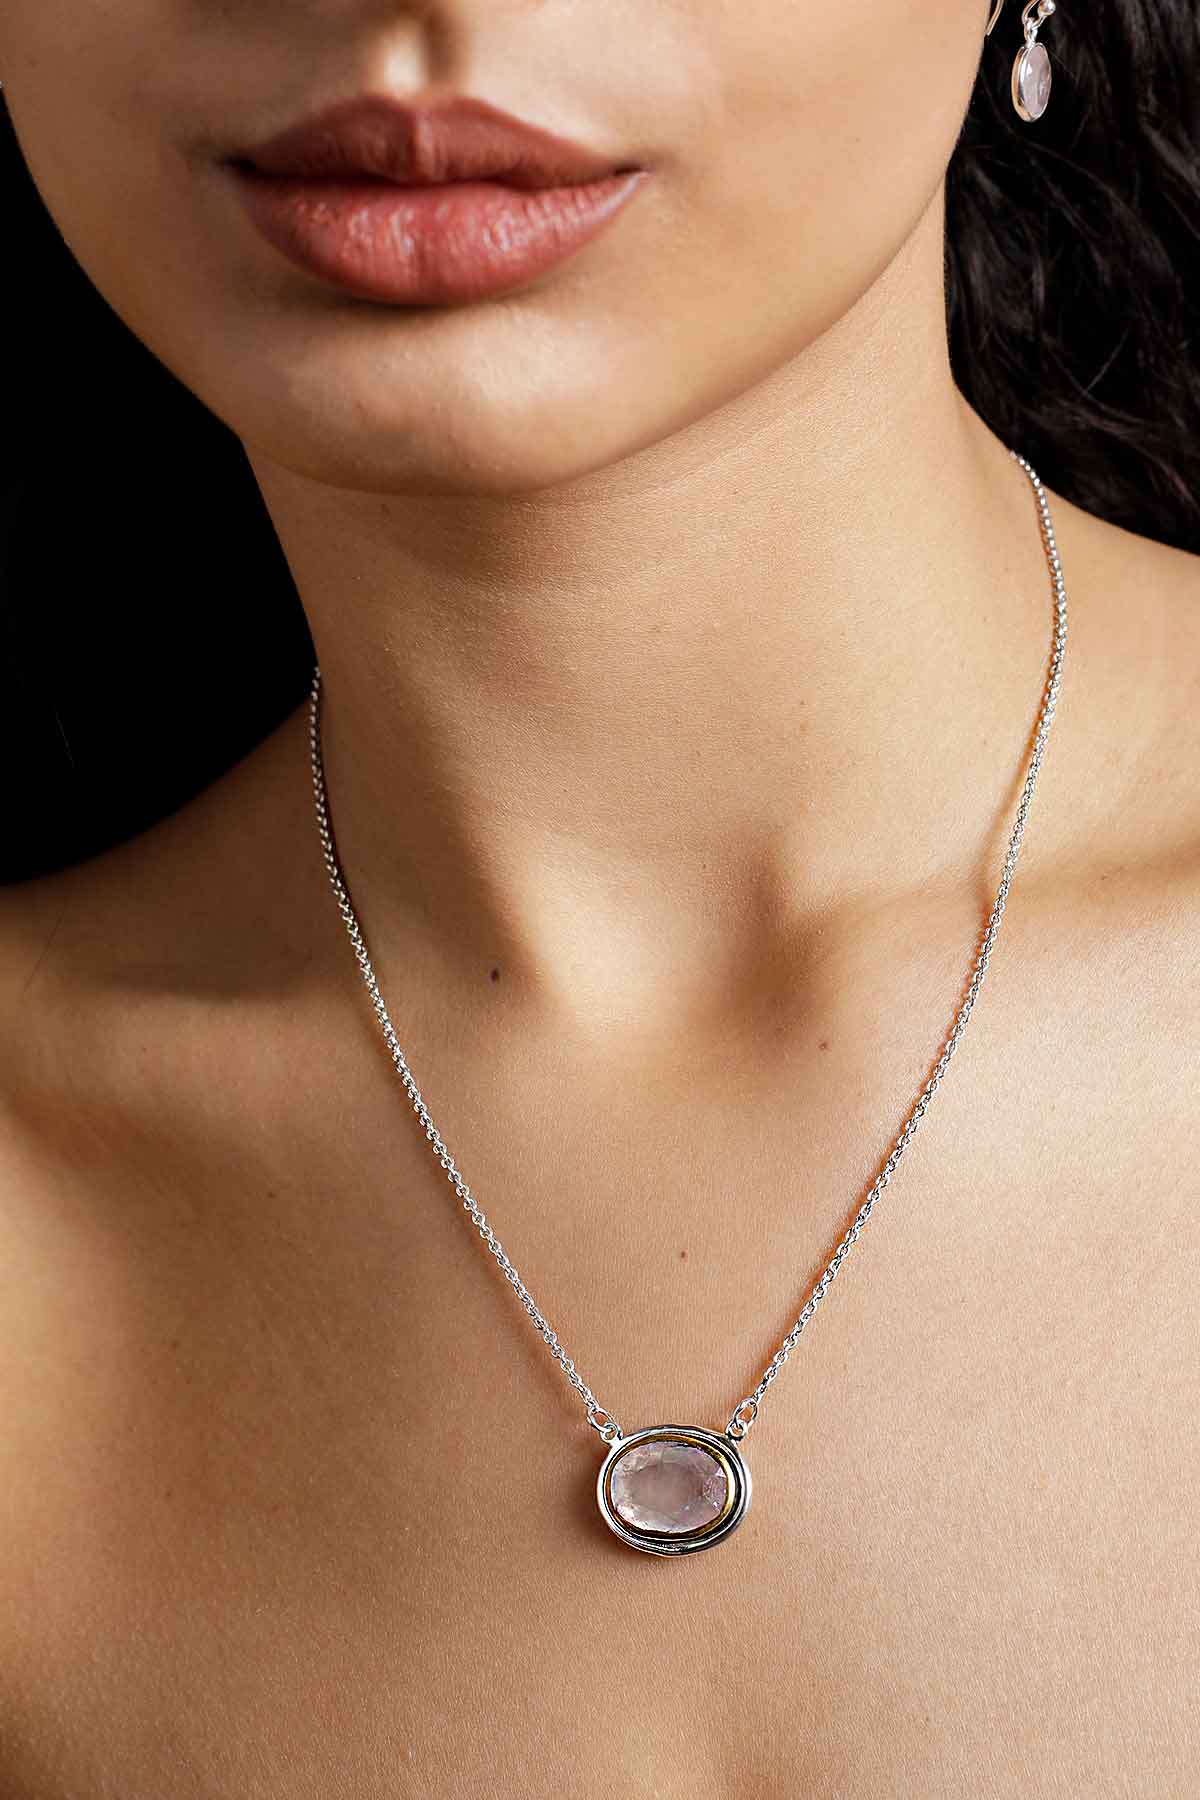 The Rose Chalcedony Necklace